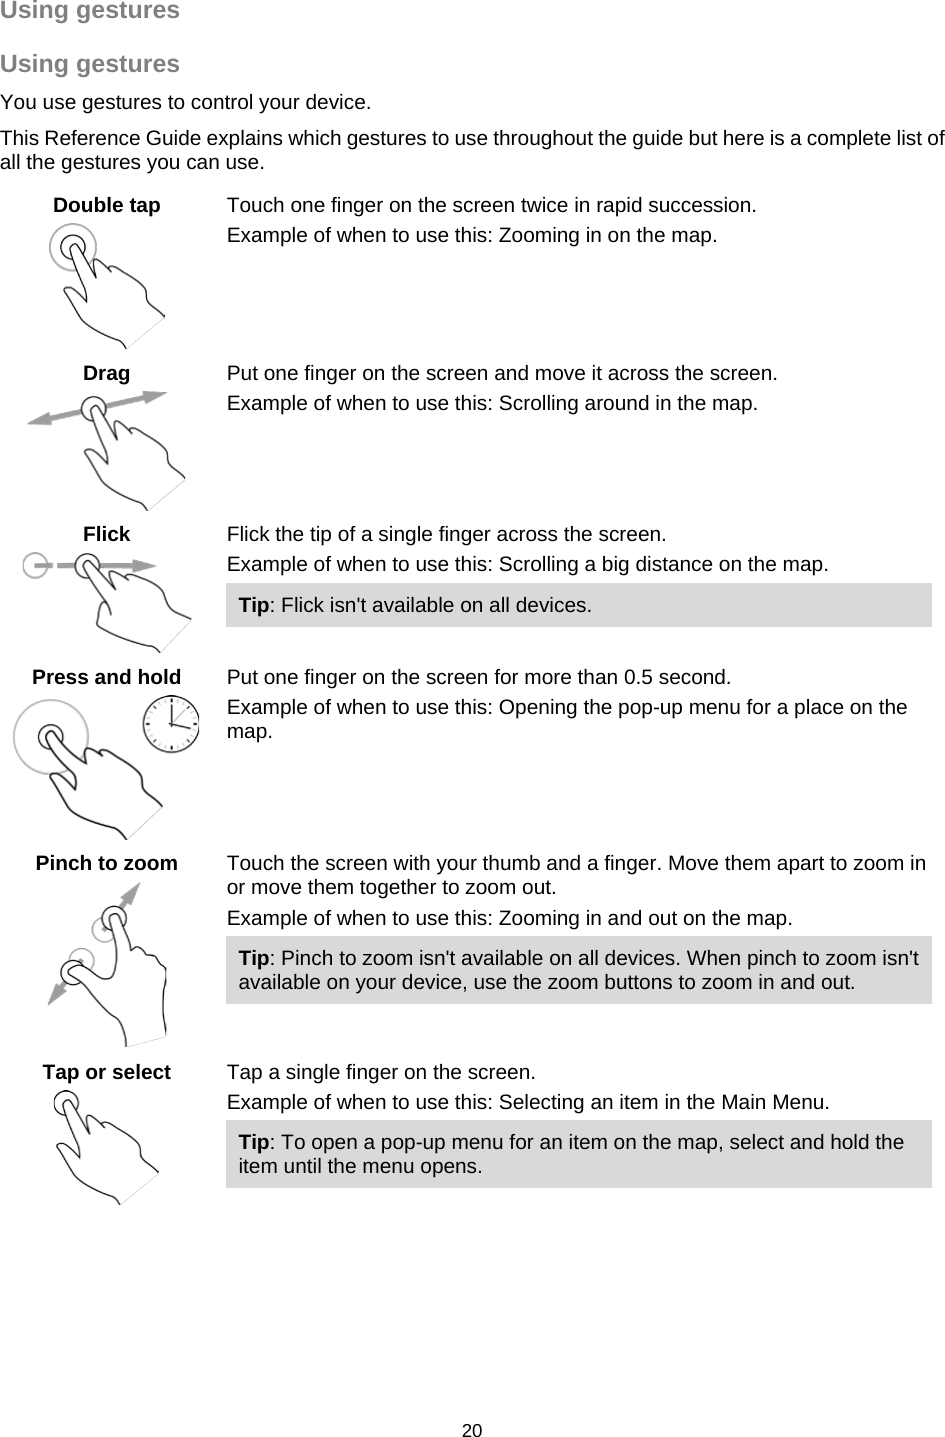  Using gestures Using gestures You use gestures to control your device.   This Reference Guide explains which gestures to use throughout the guide but here is a complete list of all the gestures you can use. Double tap   Touch one finger on the screen twice in rapid succession. Example of when to use this: Zooming in on the map.  Drag   Put one finger on the screen and move it across the screen. Example of when to use this: Scrolling around in the map. Flick   Flick the tip of a single finger across the screen. Example of when to use this: Scrolling a big distance on the map. Tip: Flick isn&apos;t available on all devices.  Press and hold   Put one finger on the screen for more than 0.5 second. Example of when to use this: Opening the pop-up menu for a place on the map.   Pinch to zoom   Touch the screen with your thumb and a finger. Move them apart to zoom in or move them together to zoom out. Example of when to use this: Zooming in and out on the map. Tip: Pinch to zoom isn&apos;t available on all devices. When pinch to zoom isn&apos;t available on your device, use the zoom buttons to zoom in and out. Tap or select   Tap a single finger on the screen. Example of when to use this: Selecting an item in the Main Menu. Tip: To open a pop-up menu for an item on the map, select and hold the item until the menu opens. 20   